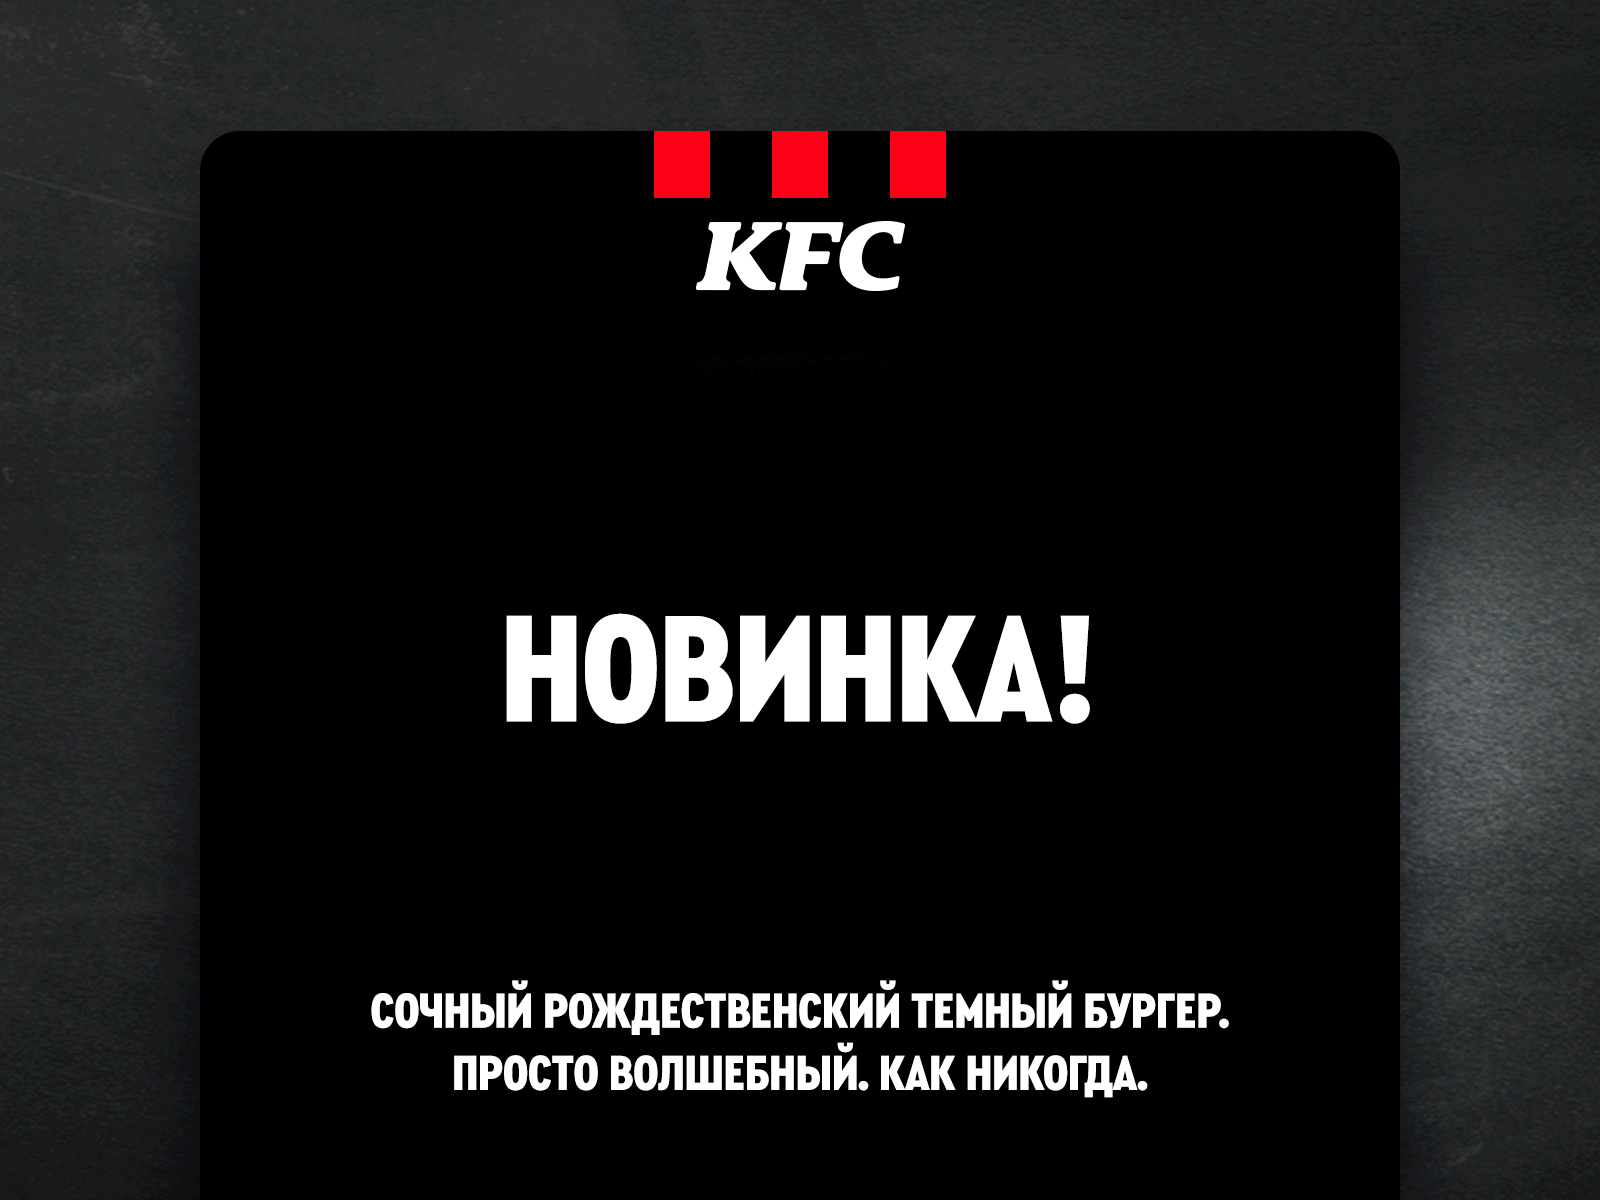 Email Marketing for KFC Russia